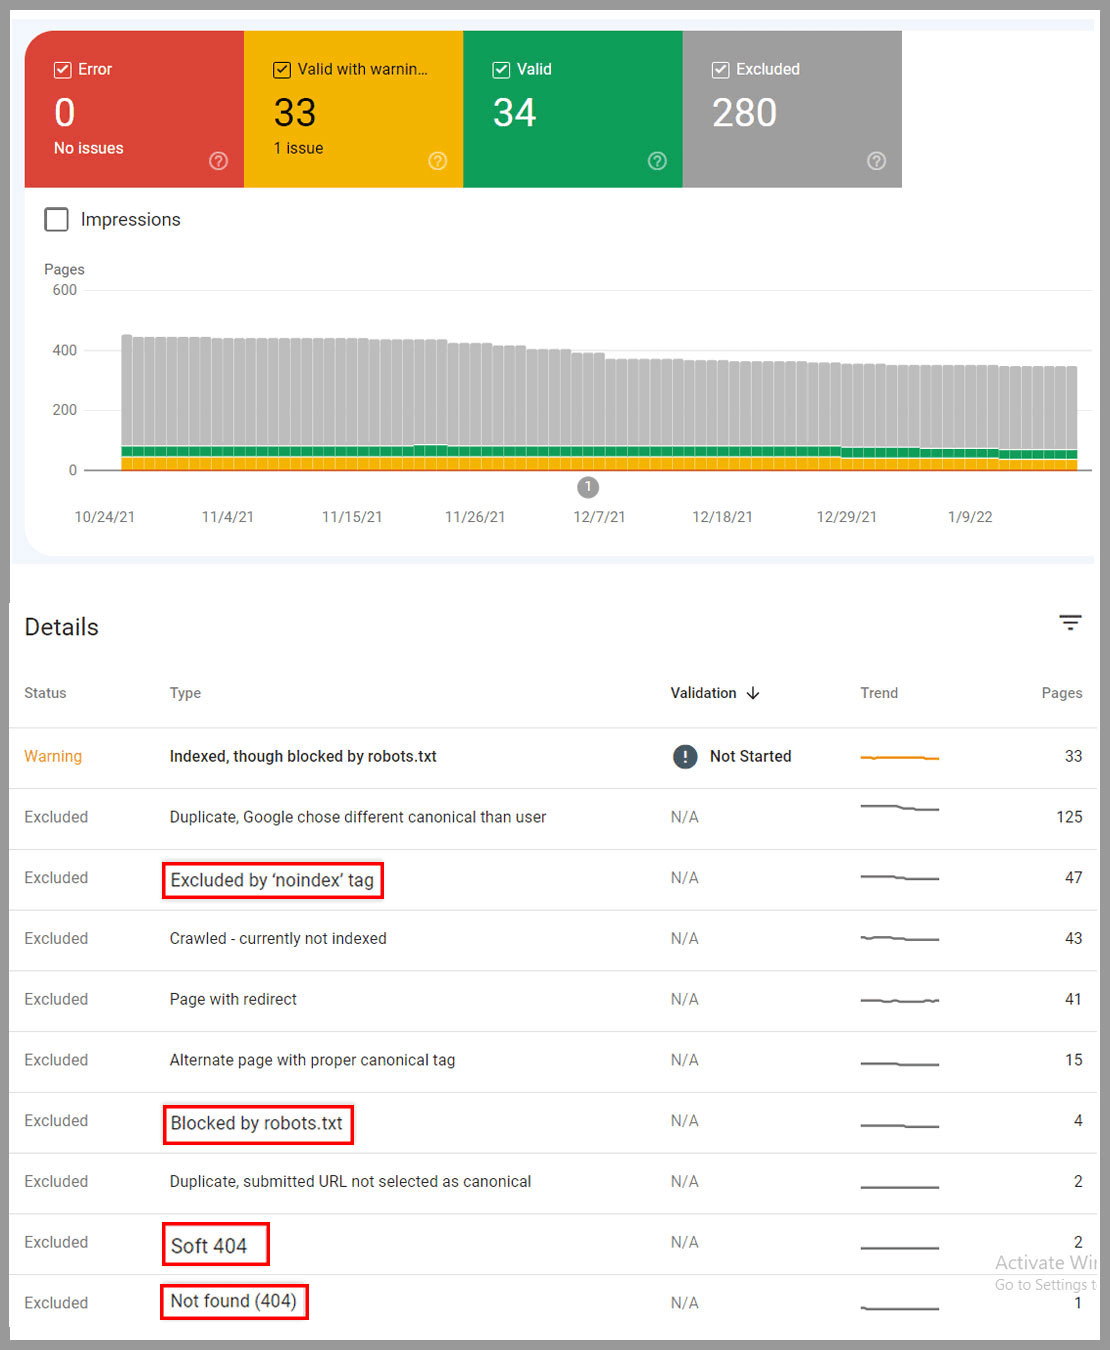 Find out websites valid pages, excluded pages, and warnings at Google Search Console